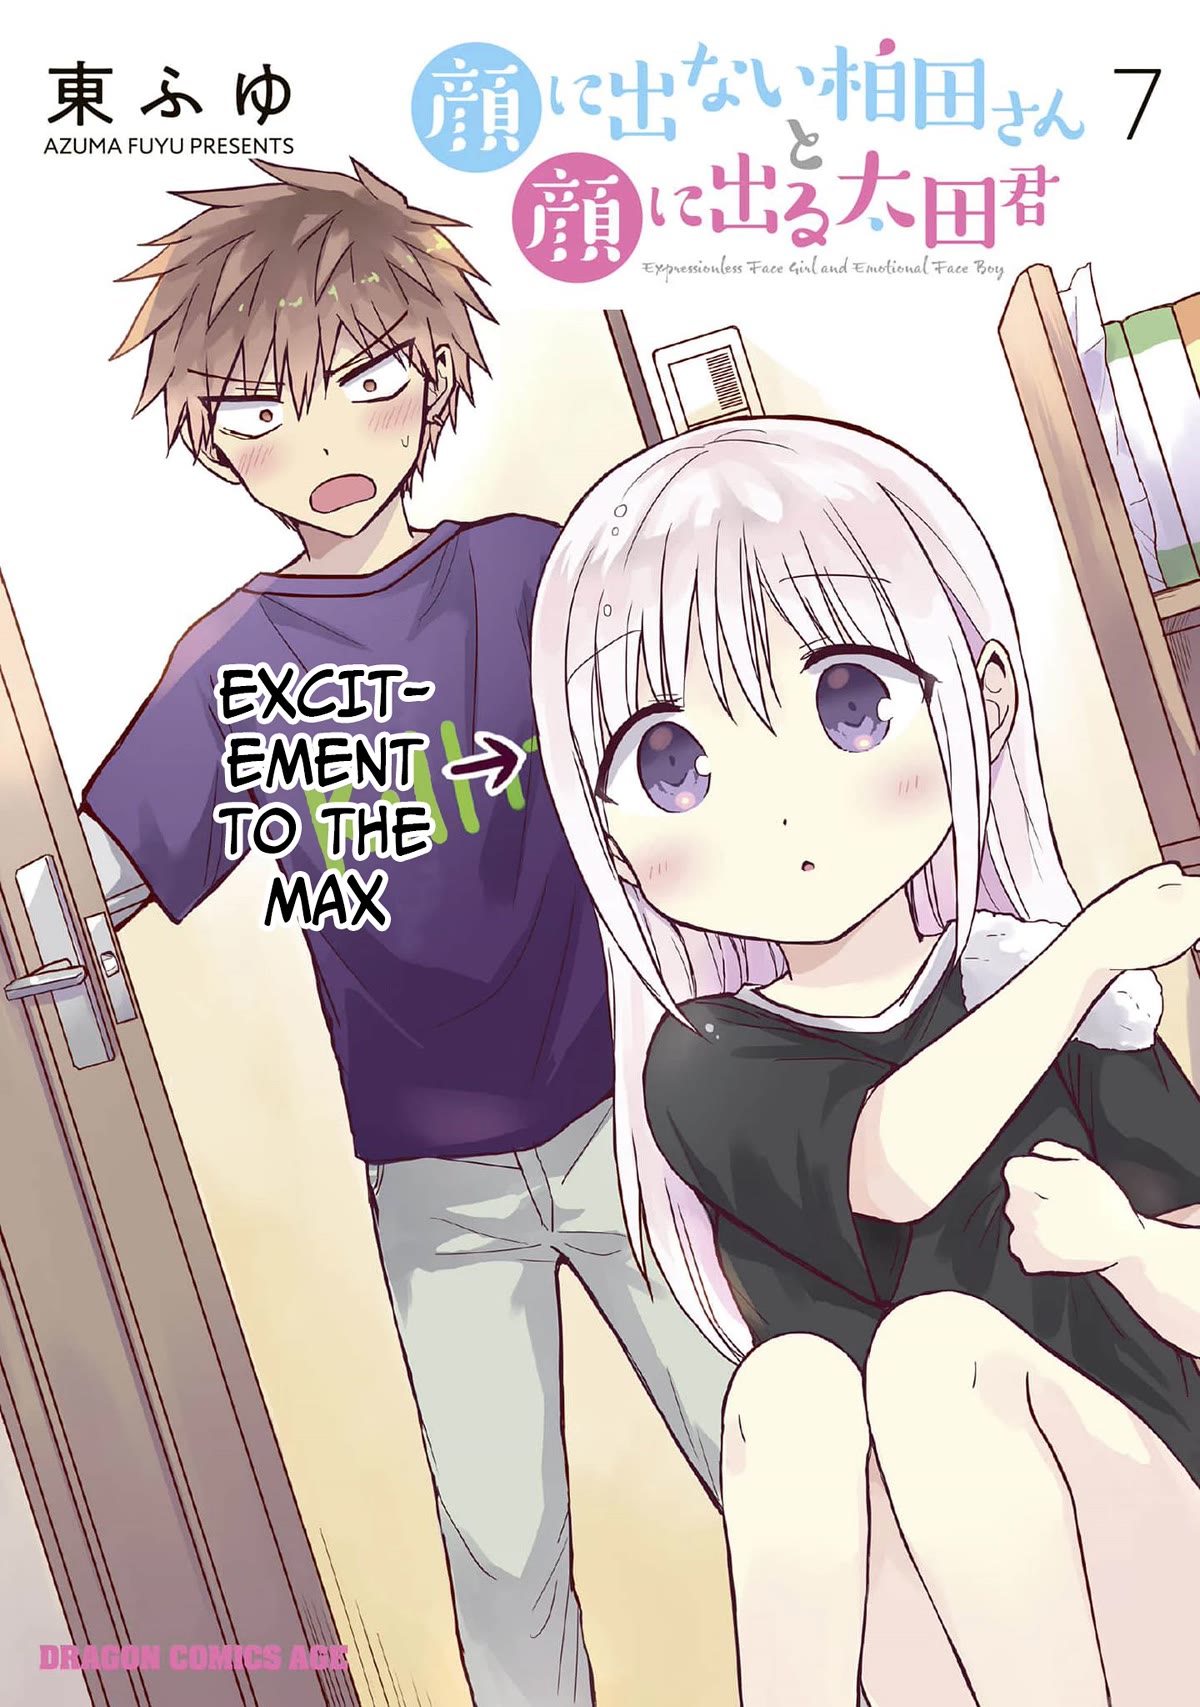 Expressionless Face Girl And Emotional Face Boy - chapter 76 - #1